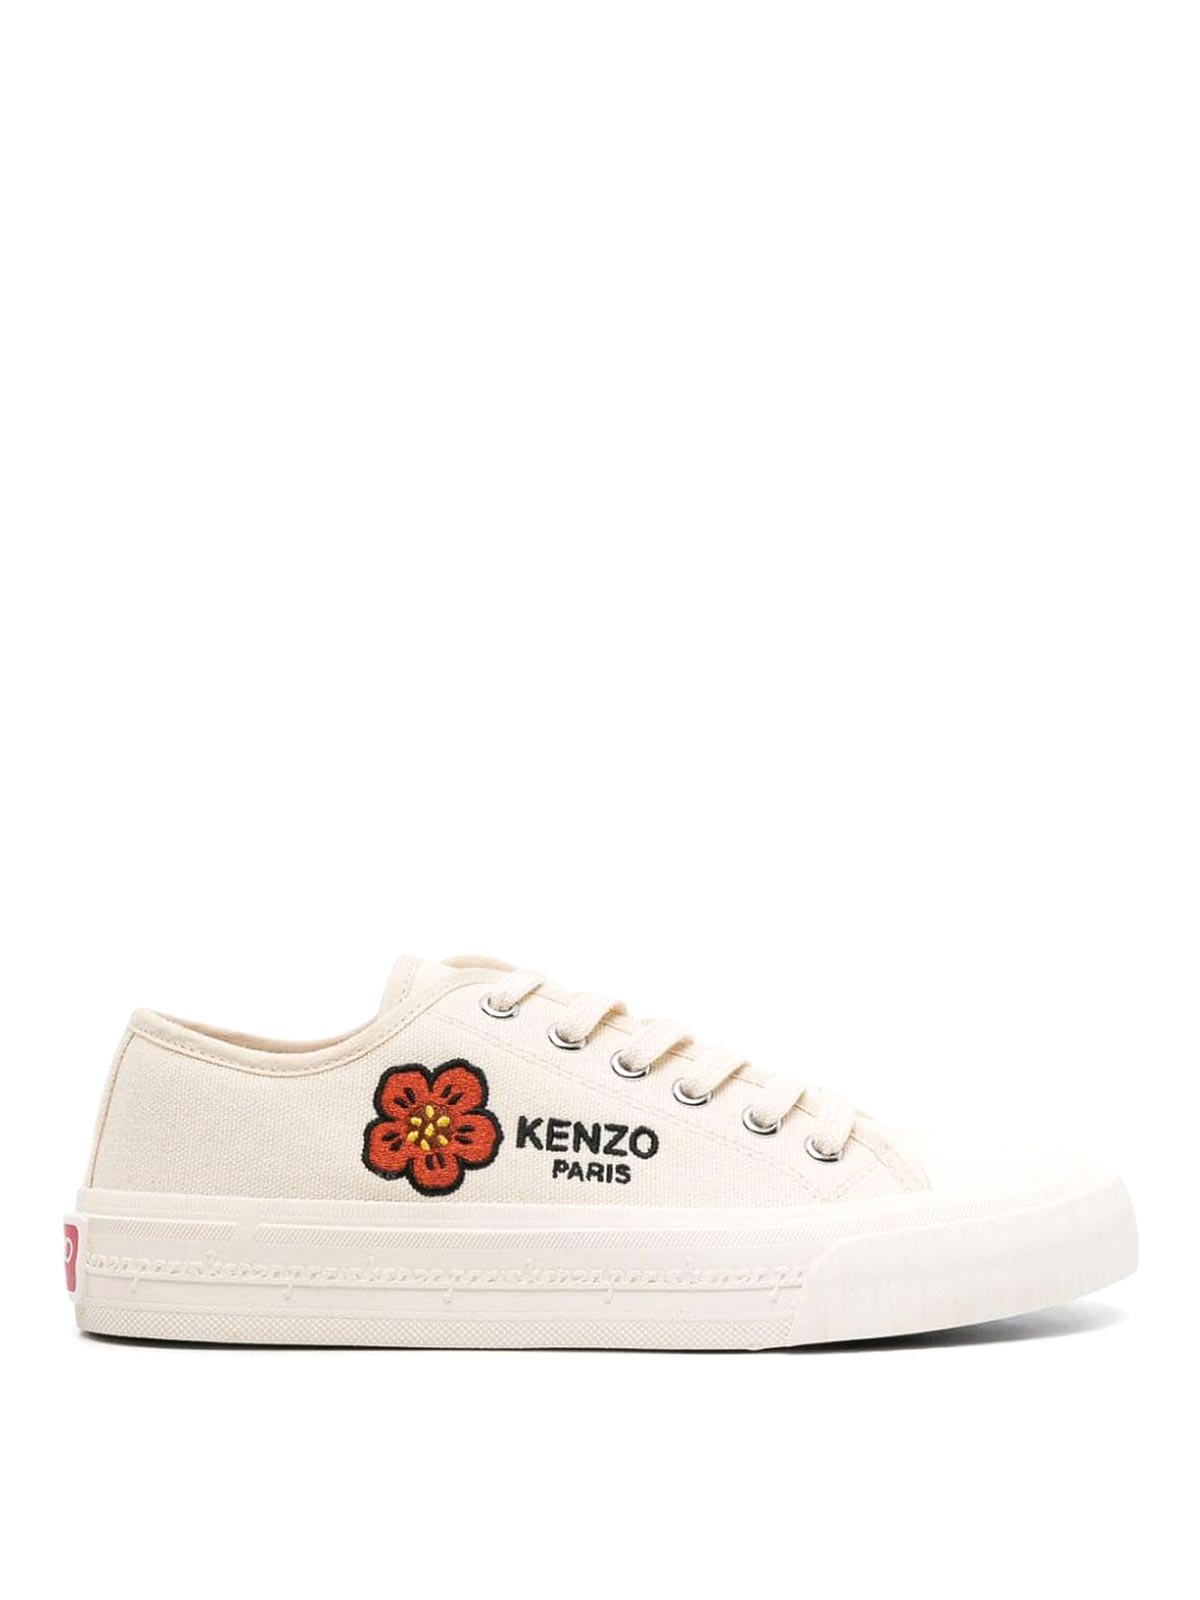 Shop Kenzo Canvas Sneakers In White